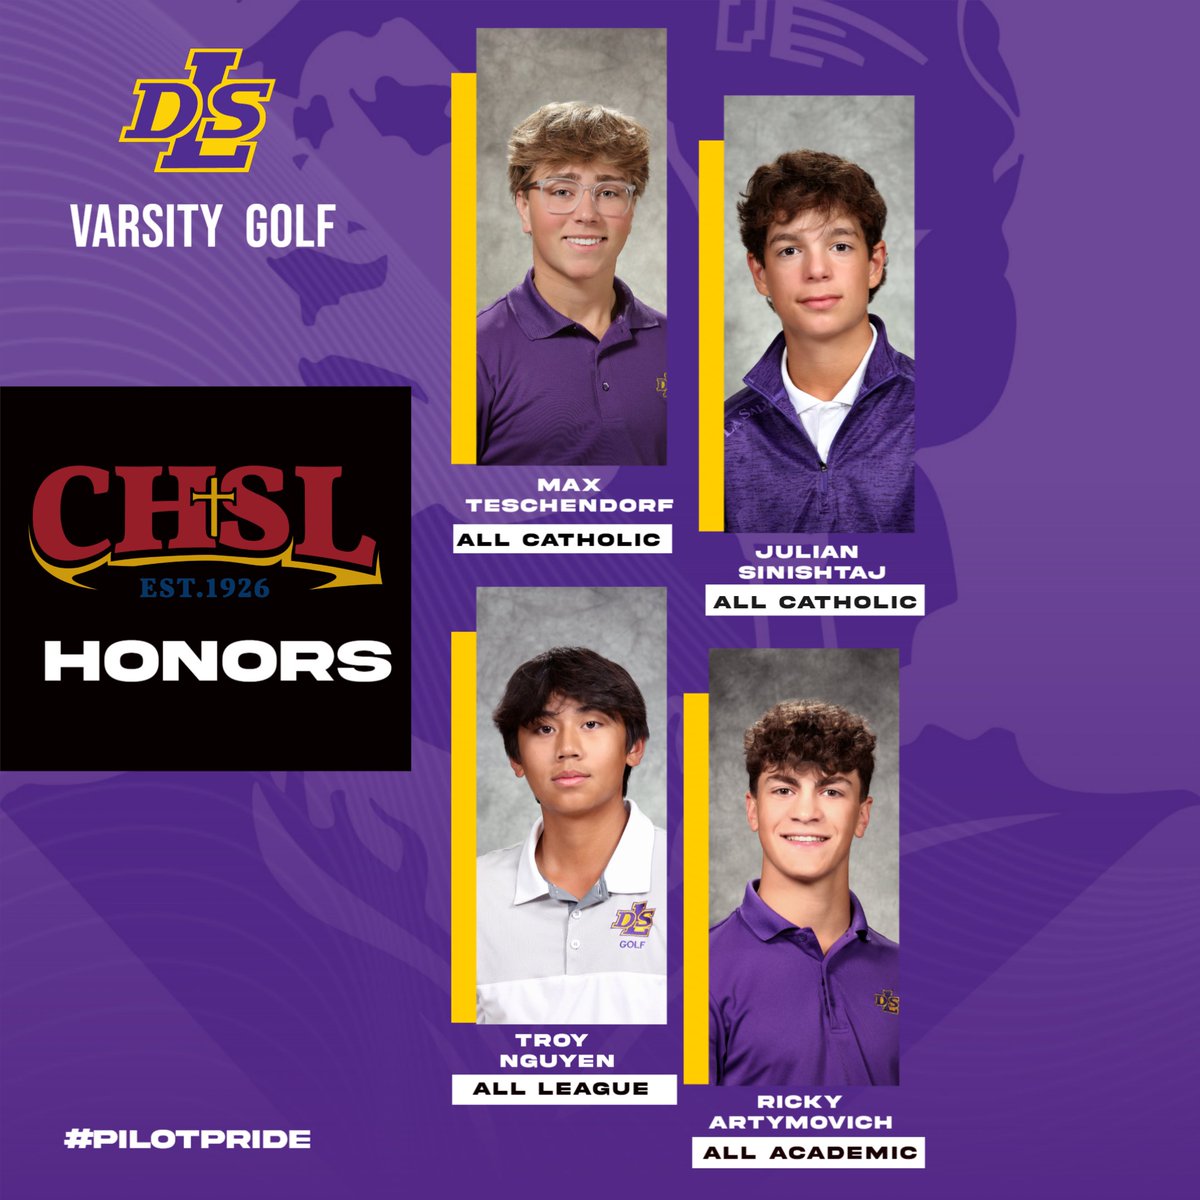 Congratulations to those from DLS Varsity Golf who earned CHSL honors: Max Teschendorf and Julian Sinishtaj, All Catholic; Troy Nguyen, All League; and Ricky Artymovich, All Academic. Way to go, Pilots! #PilotPride @DLSPilotsGolf @CHSL1926